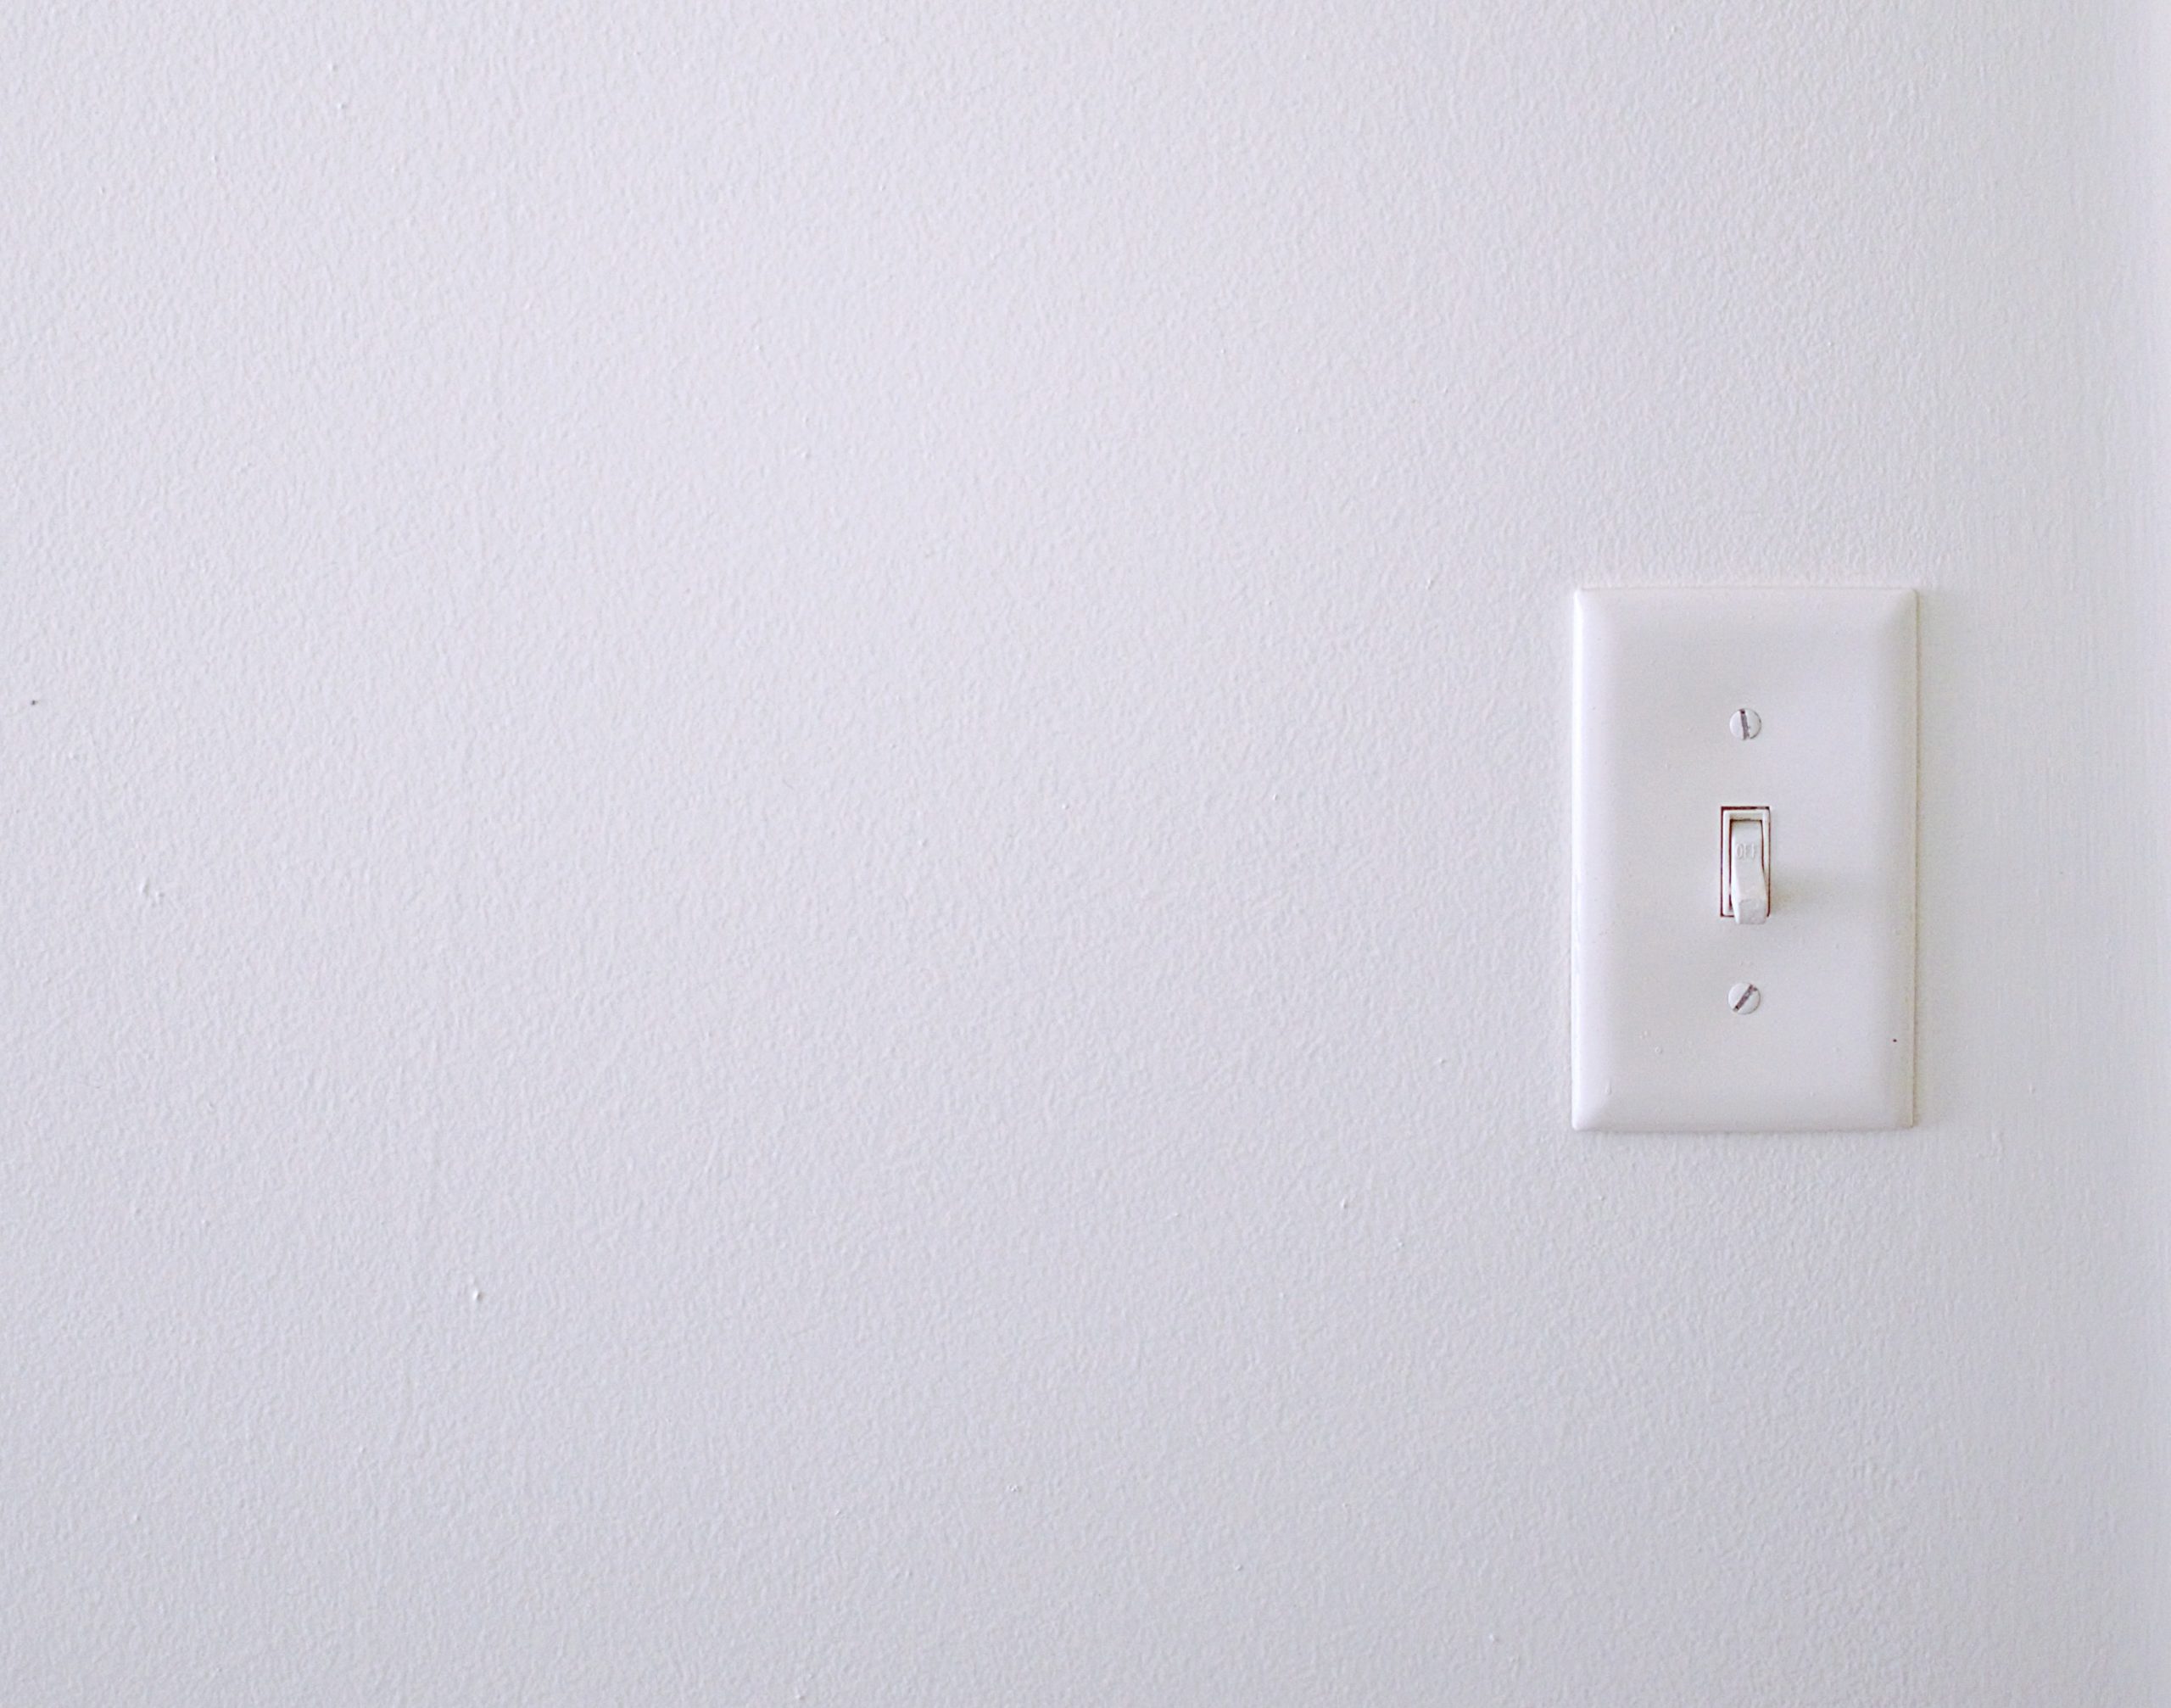 White wall with a white light switch on the right side of the frame